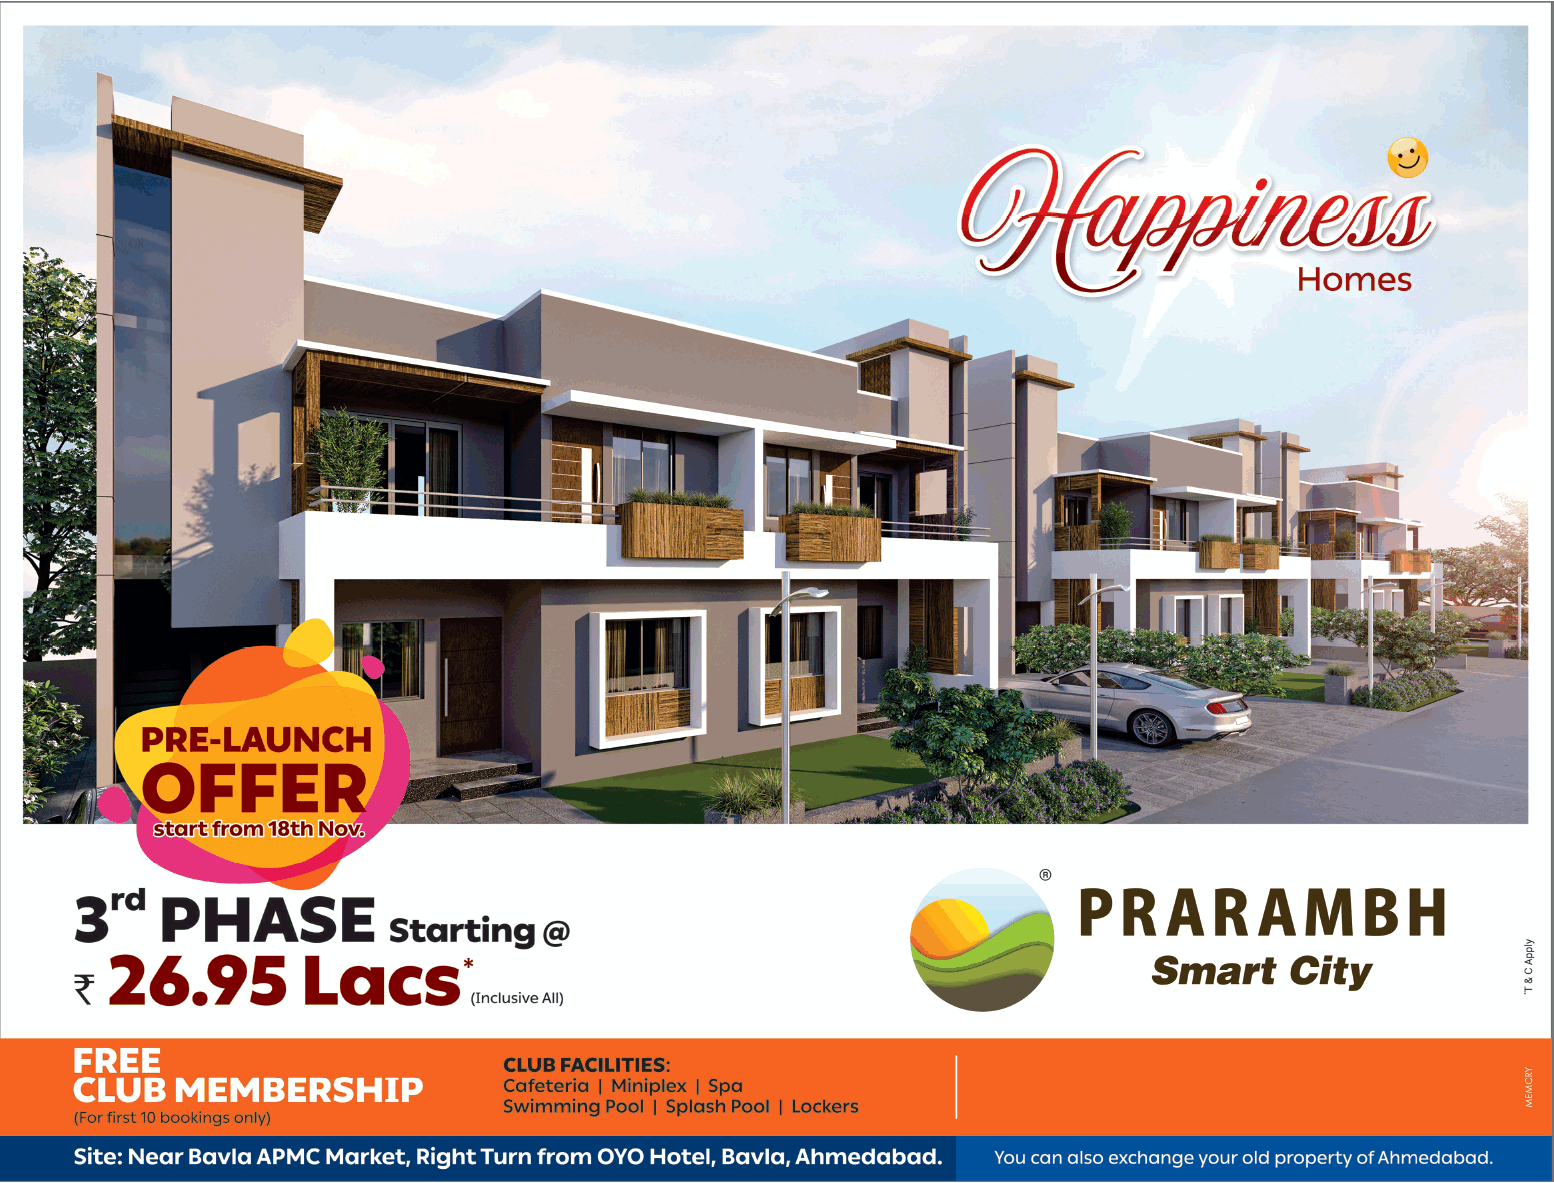 Pre launch offer 3rd phase starting Rs 26.95 Lacs at Prarambh Smart City, Ahmedabad Update